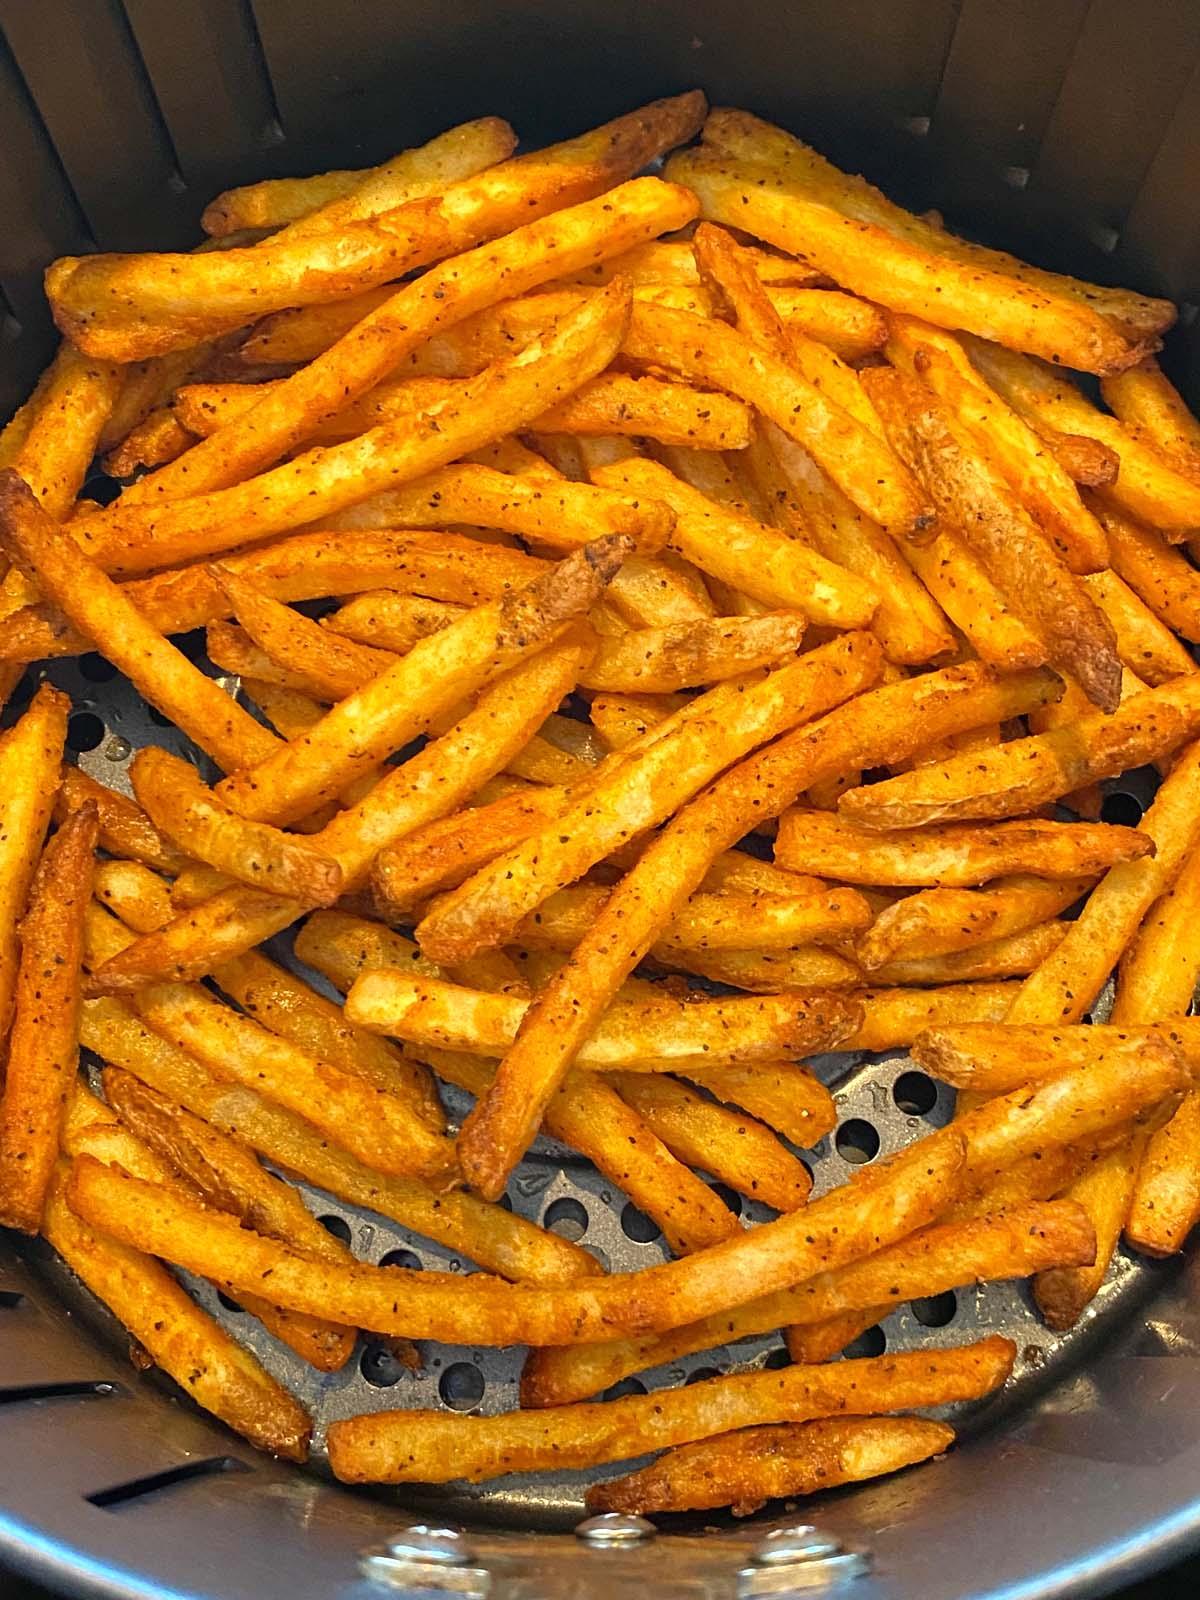 Cooked french fries in an air fryer.